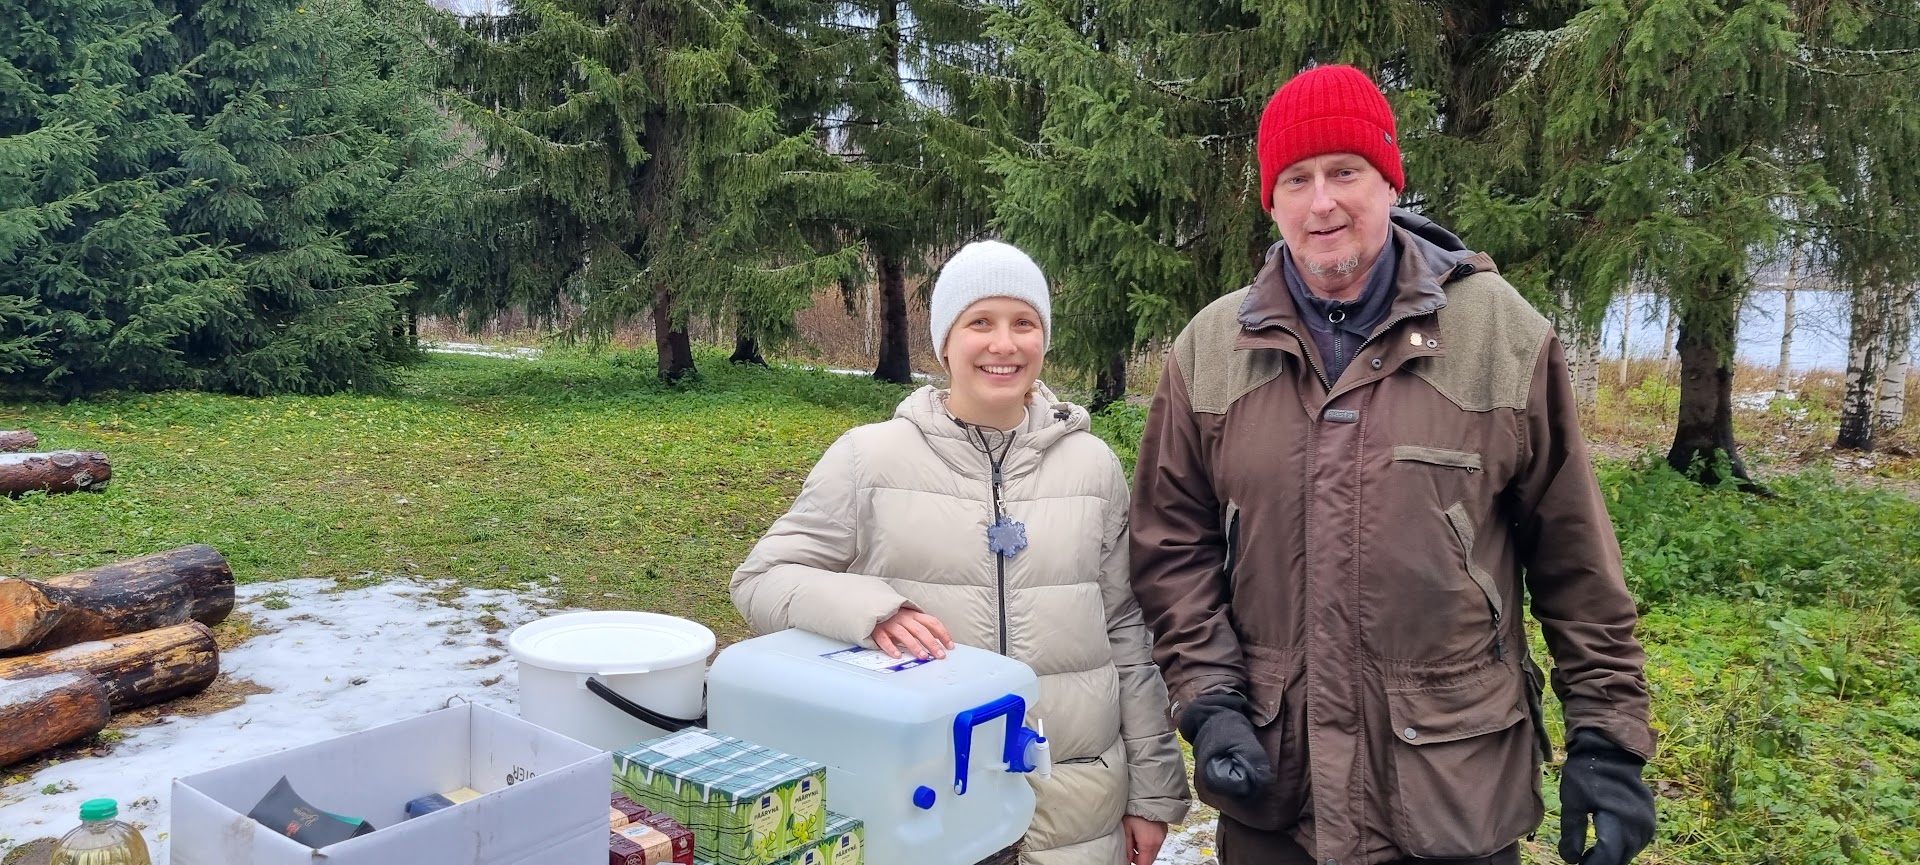 Rovaniemi Rotary Club's brother Kenneth Karlsson and sister Victoria Mlakar preparing the food for the opening.